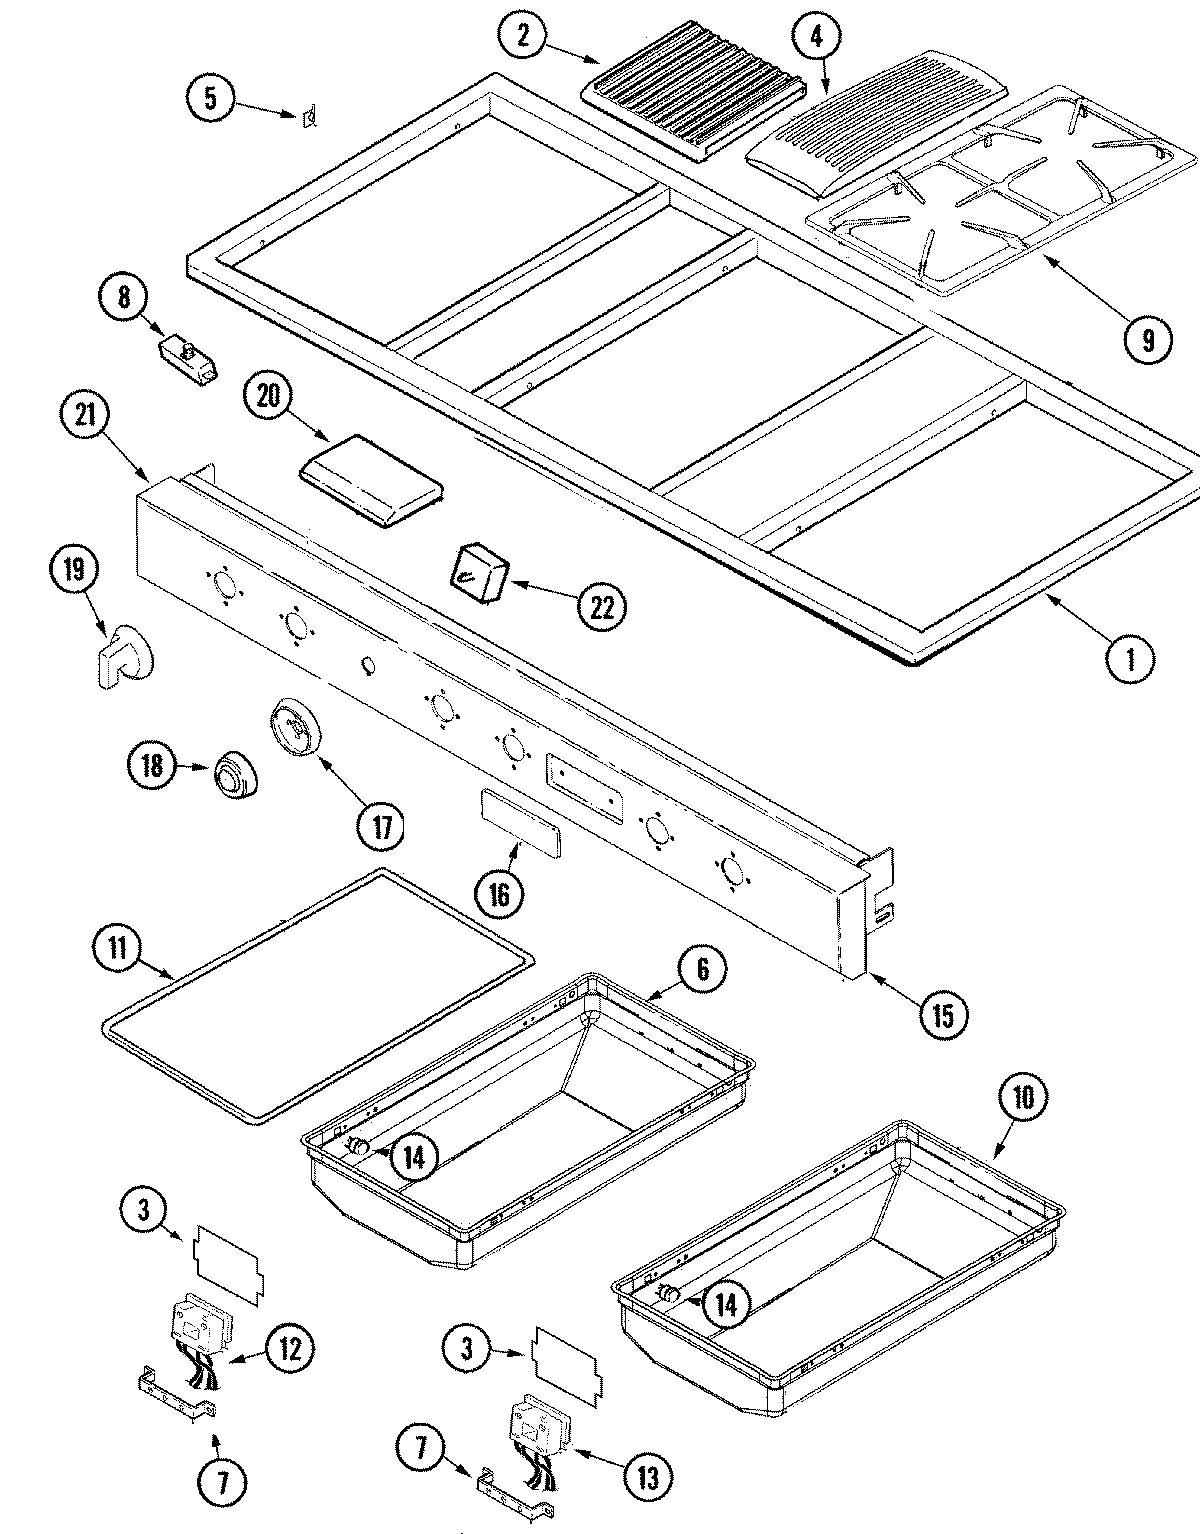 02 - CONTROL PANEL & TOP ASSEMBLY